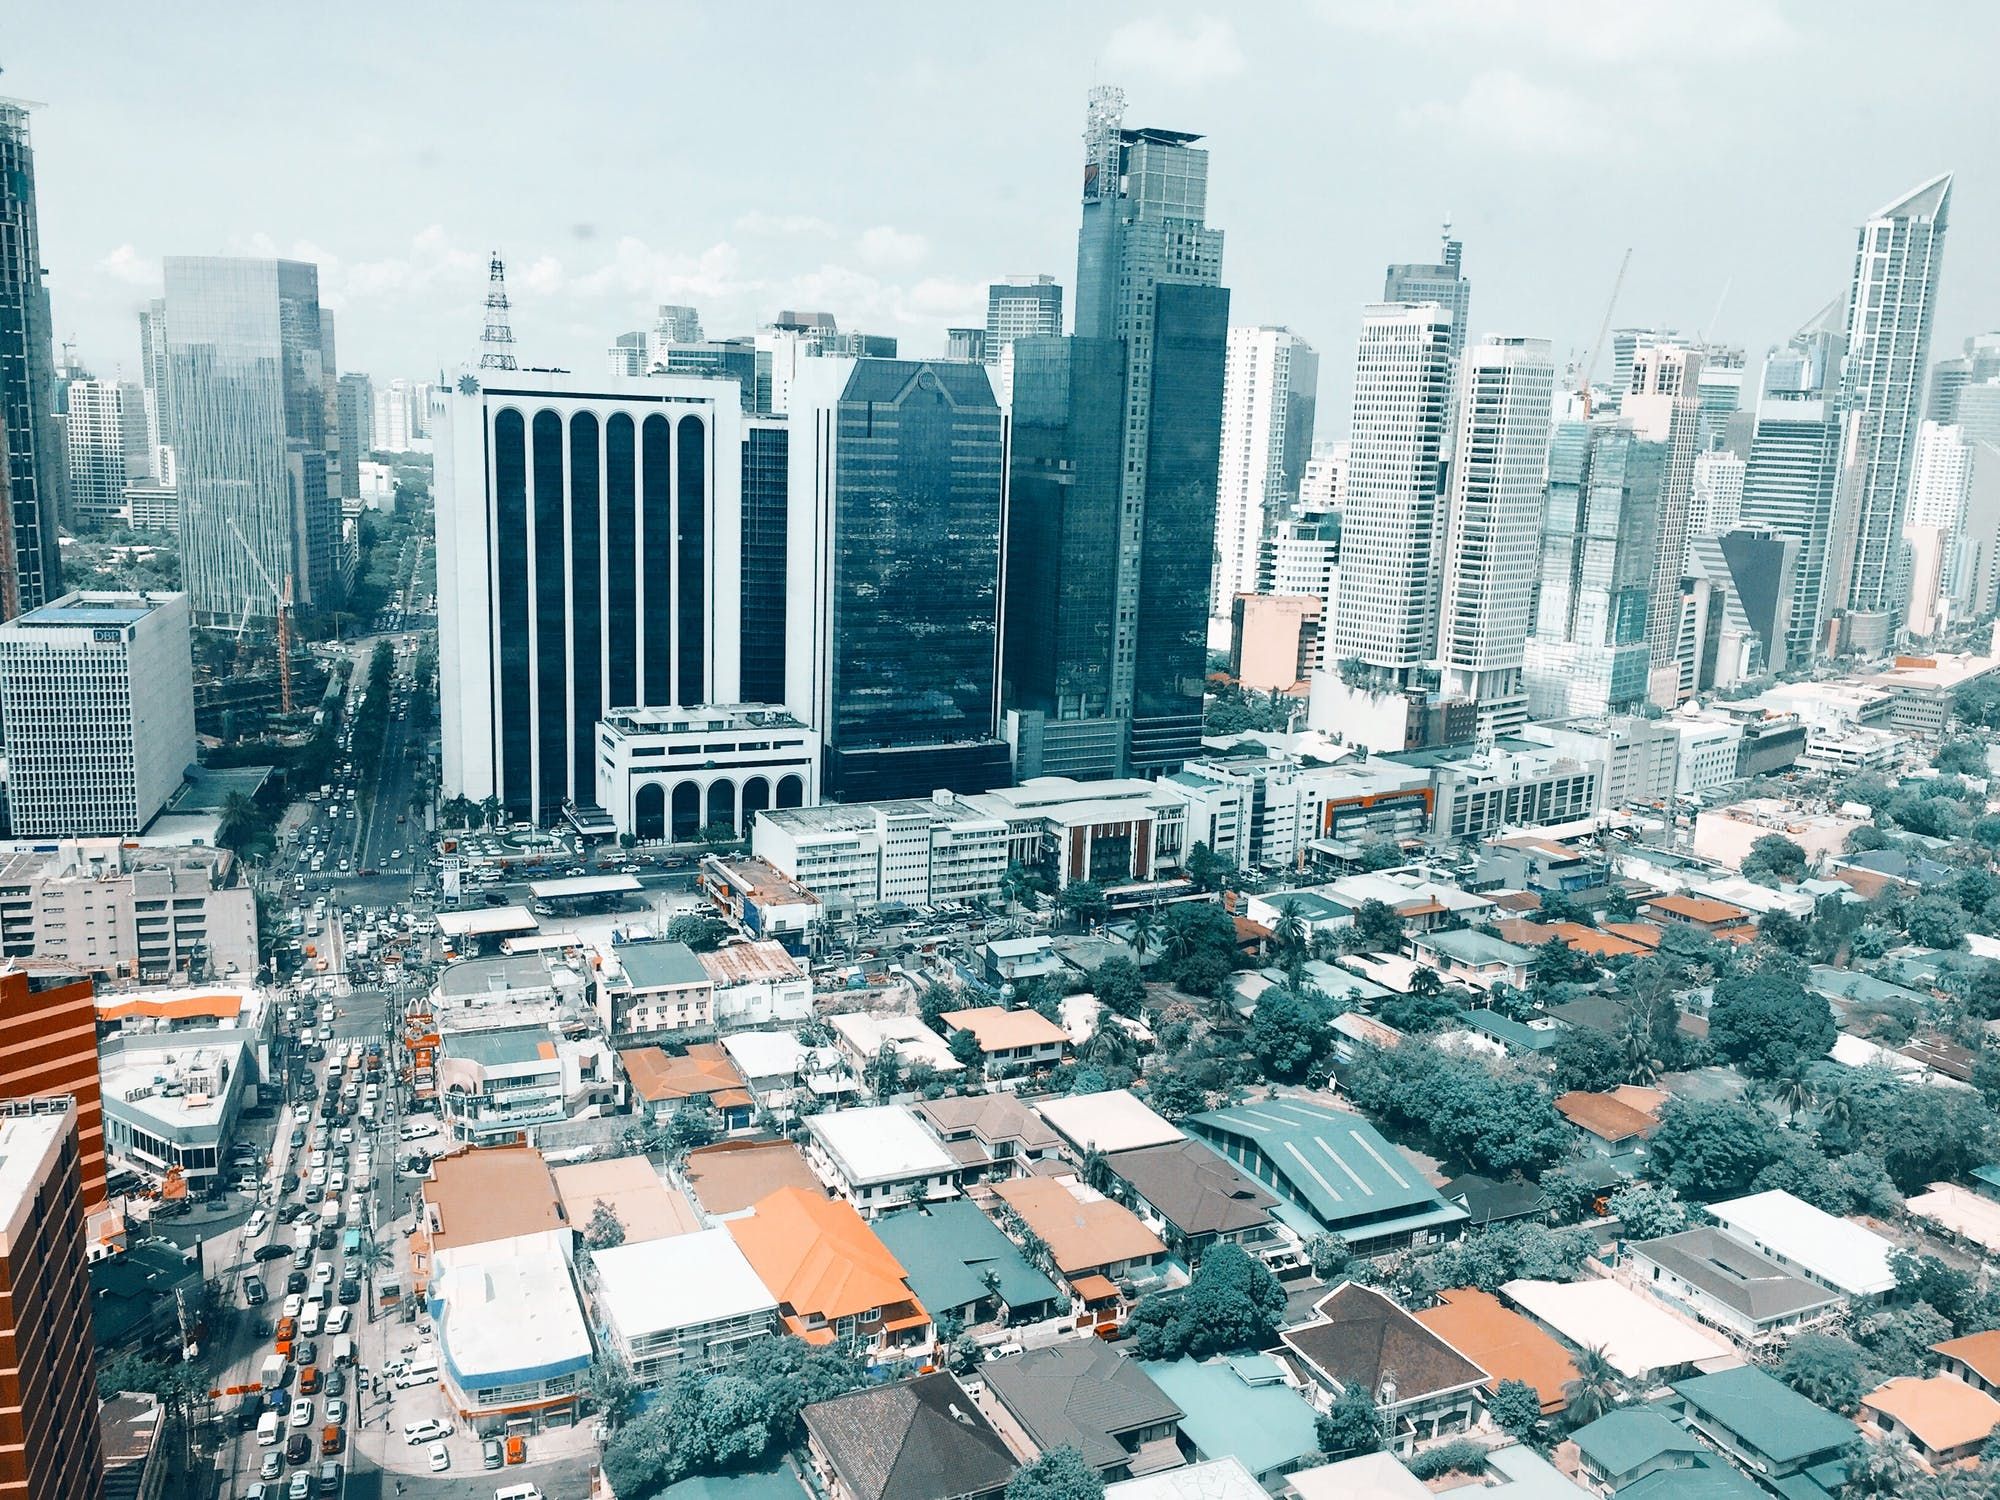 Aerial view of part of Manila